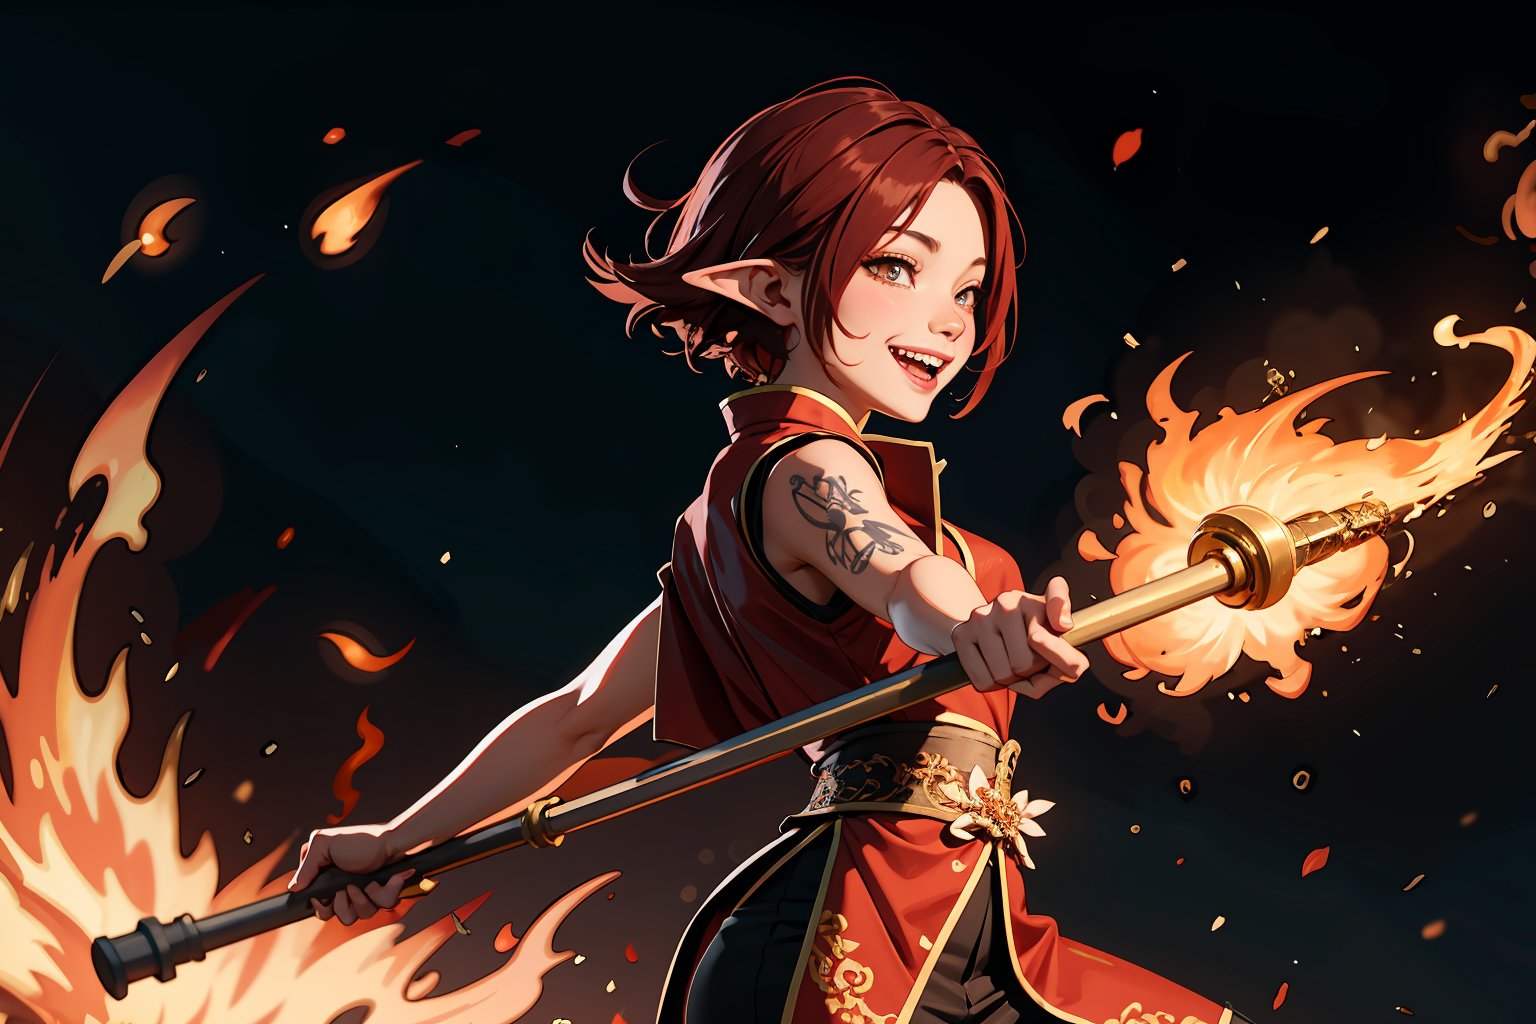 Chinese mythology, solo, 1female, monster_girl, short hair, dark red hair, (giggle:1.2), fangs, sexy lips, pointed ears, strong body, swarthy body, fire phoenix tattoo, (single wing), holding a mace, dark red vest, long pants, Chinese martial arts animation style